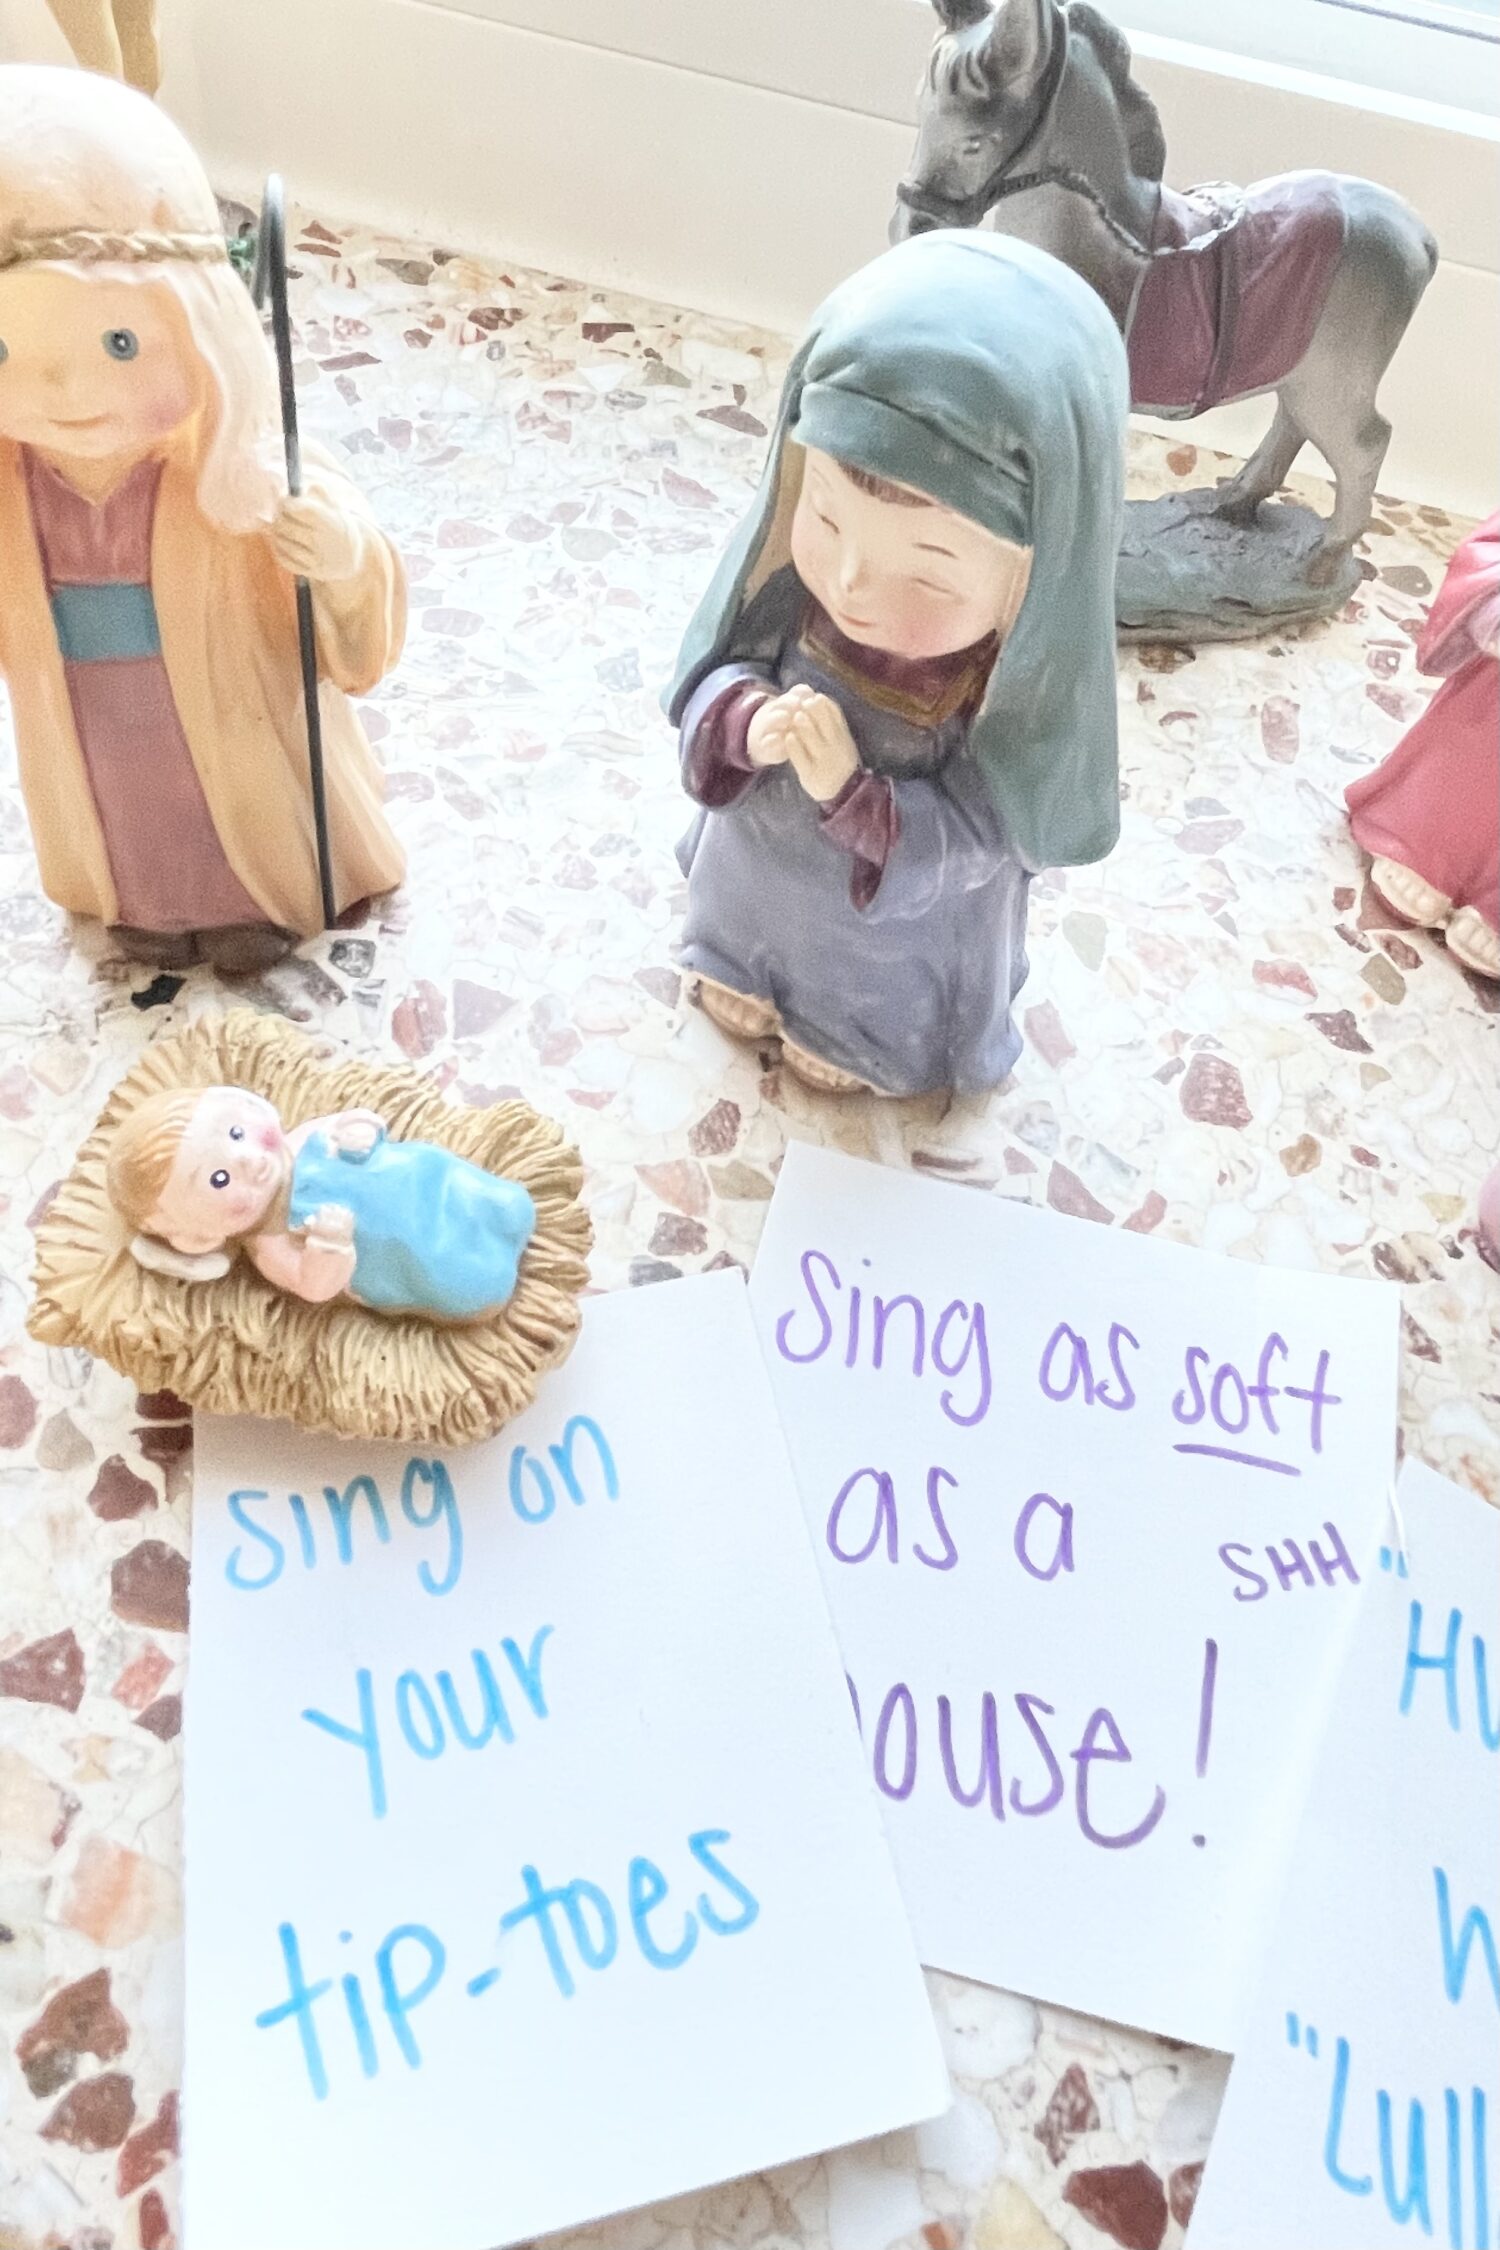 Mary's Lullaby Nativity Scene singing time idea- Add pieces to a manger scene gradually as you practice this song in this spiritual activity for LDS primary leaders teaching this song this Christmas!